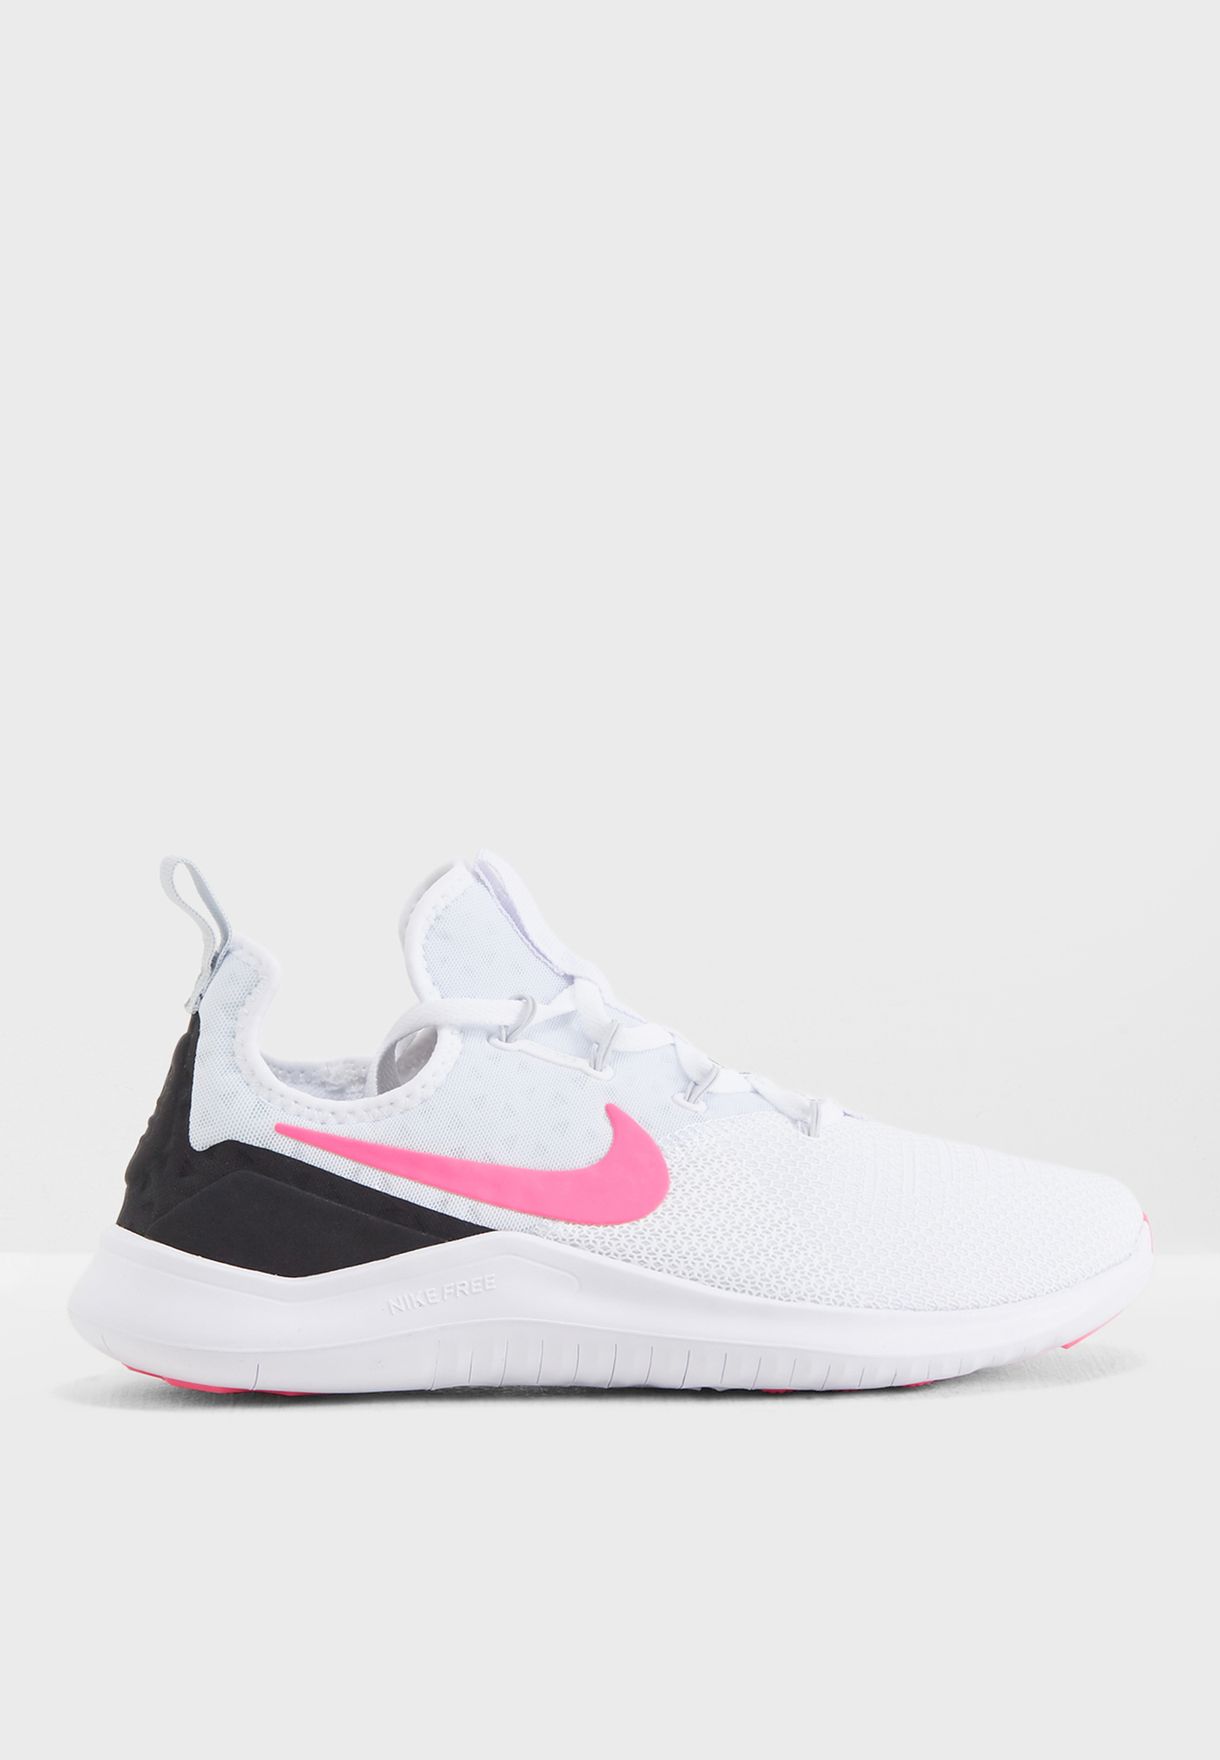 nike training free tr 8 trainers in white with pink swoosh